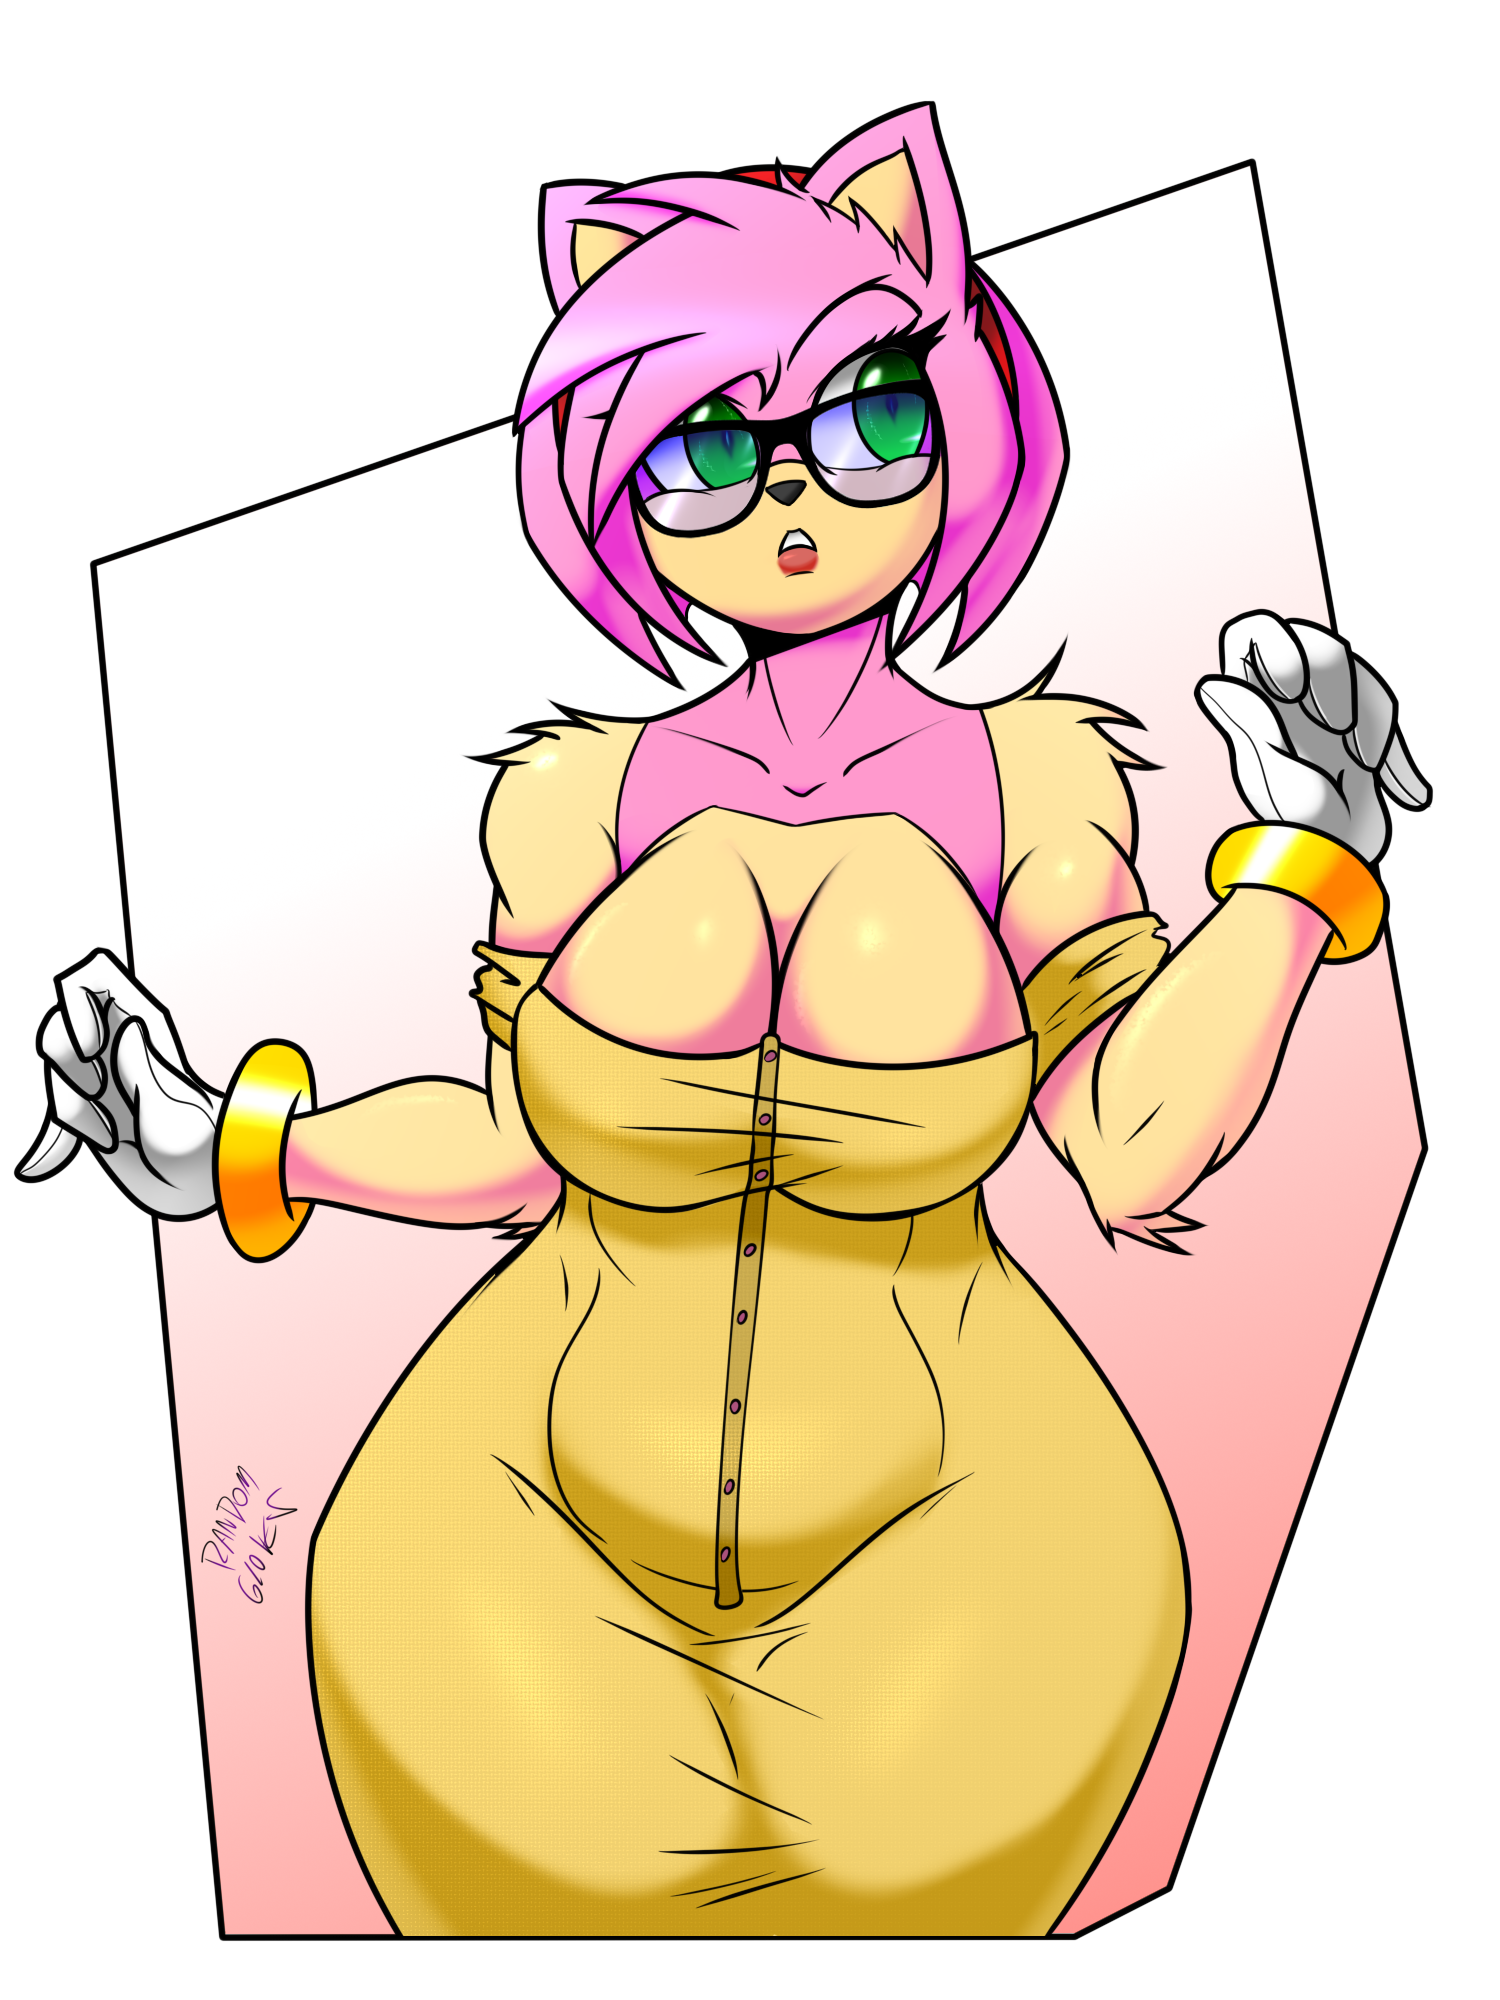 Amy thicc